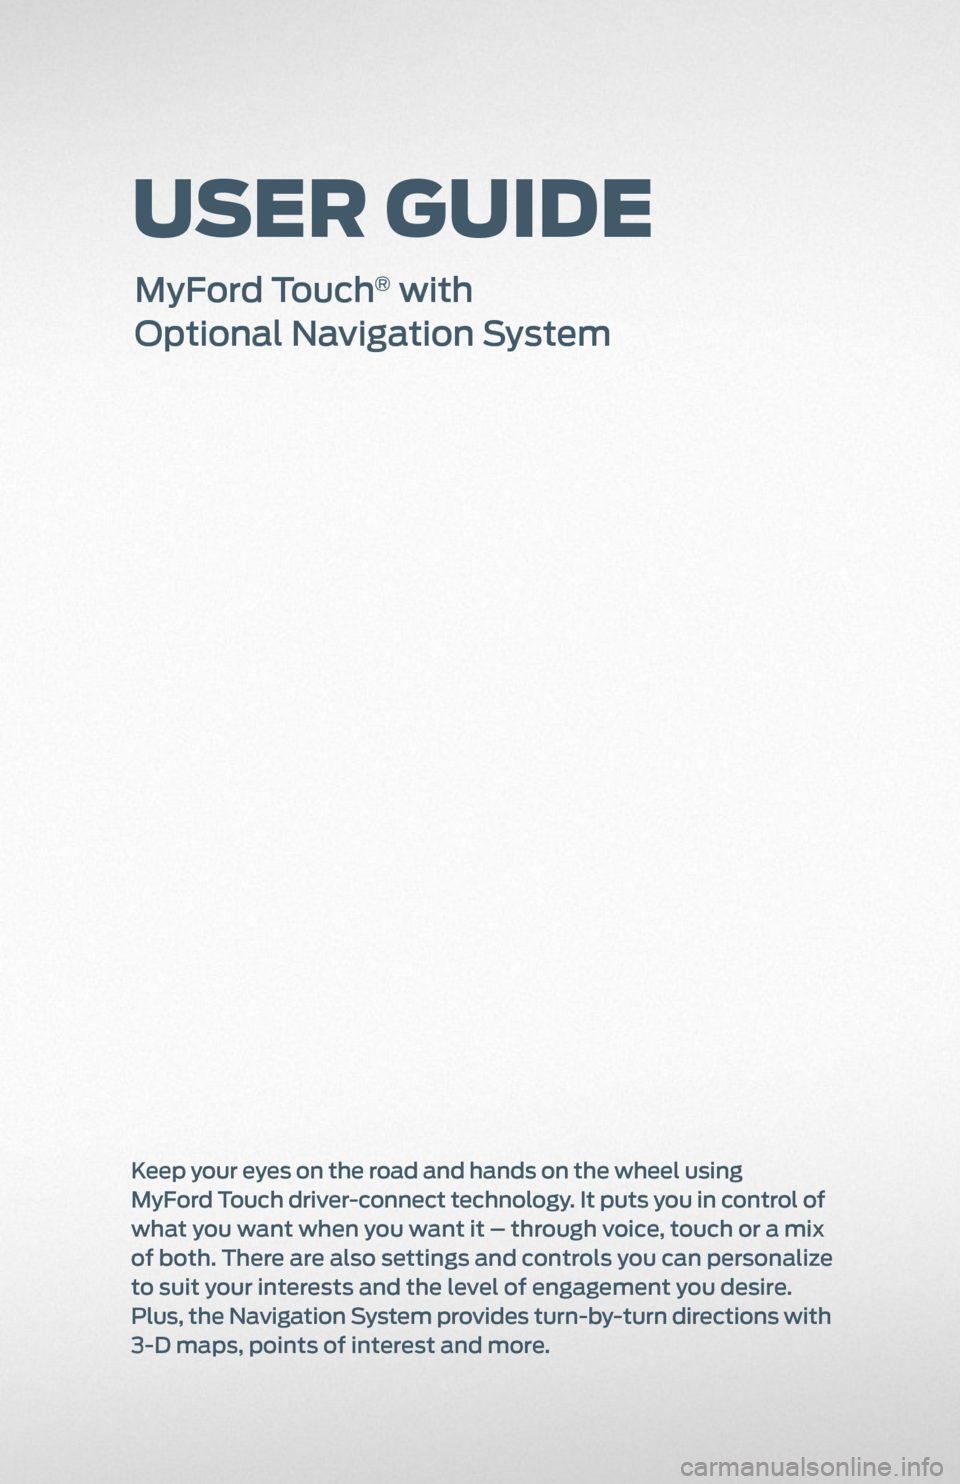 FORD FOCUS 2012 3.G MyFord Touch User Guide 